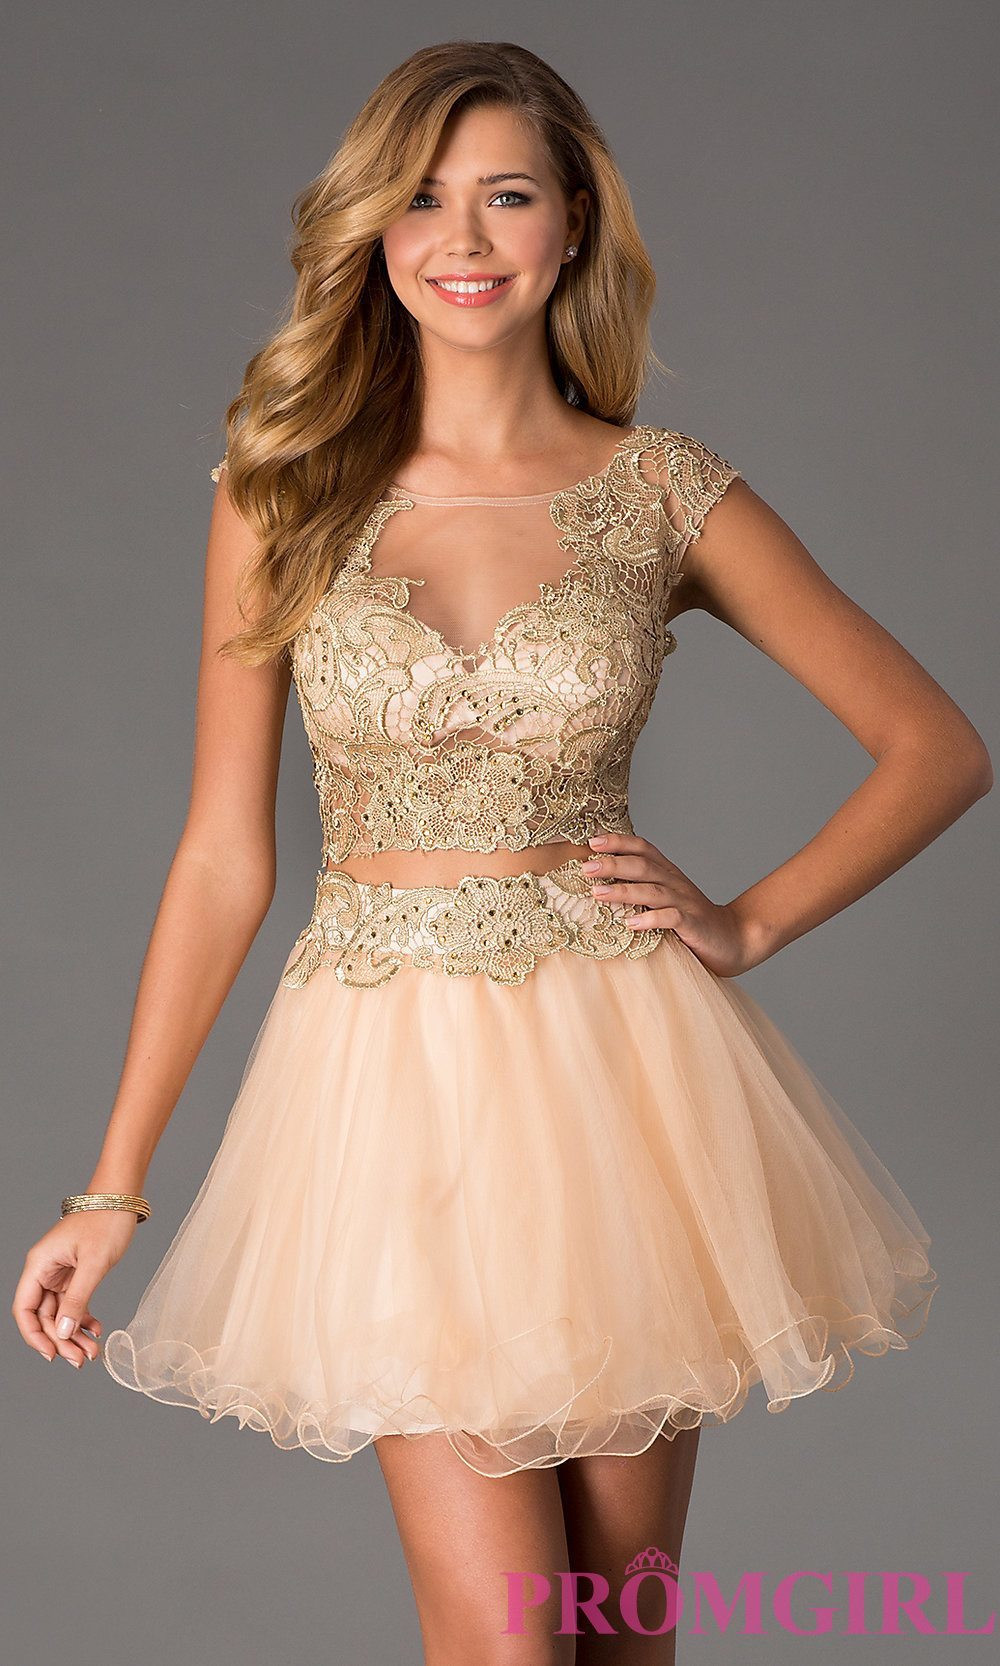 Graduation Party Dress Ideas
 20 Cute Outfit Ideas for A Graduation Party Style Guide